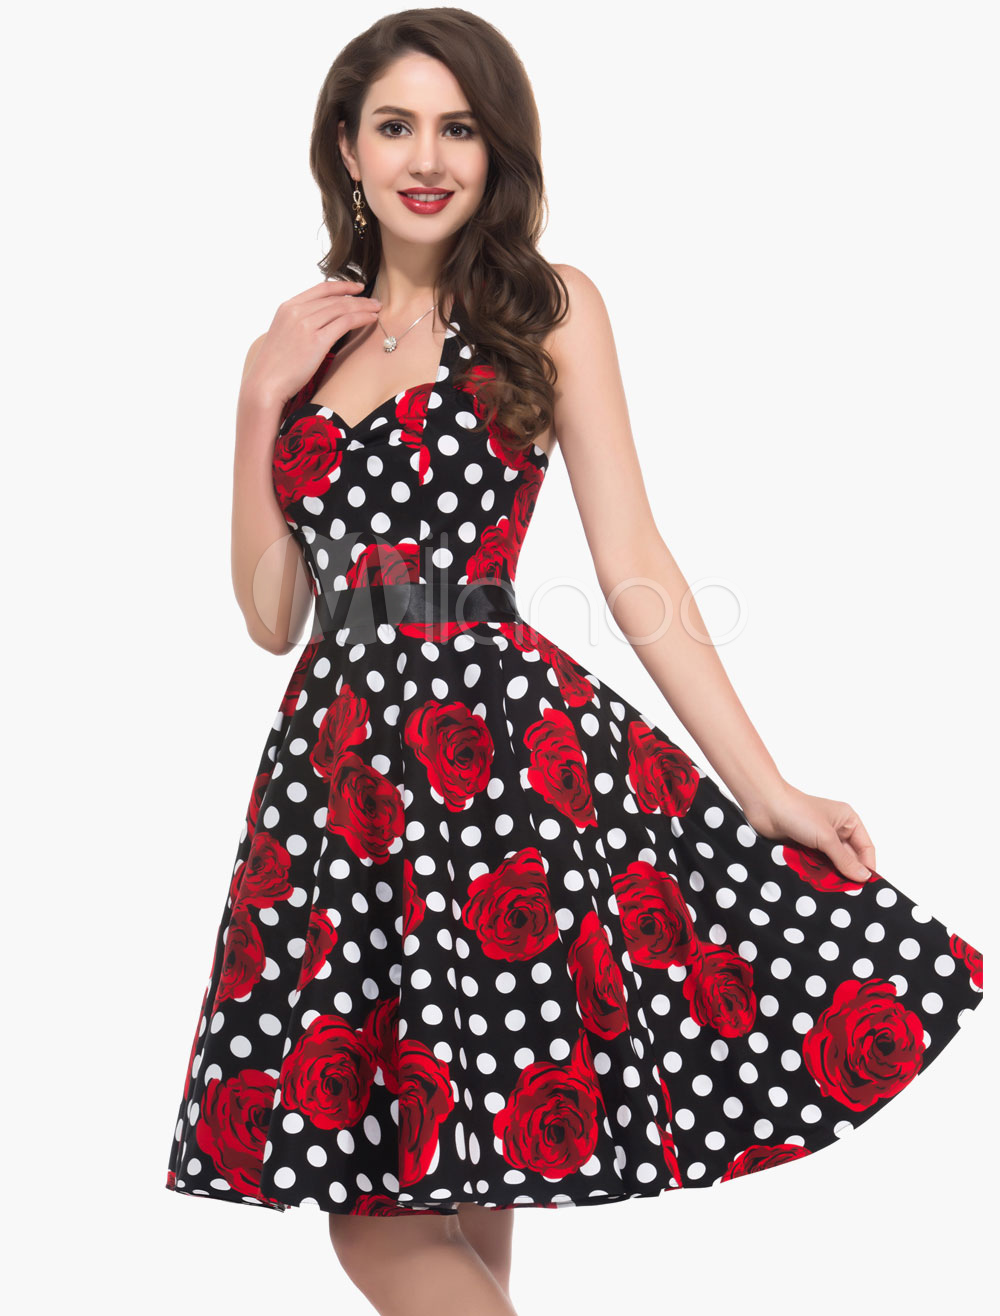 Sexy Retro Rockabilly Dance Dress With Rose and Polka Dot Print ...